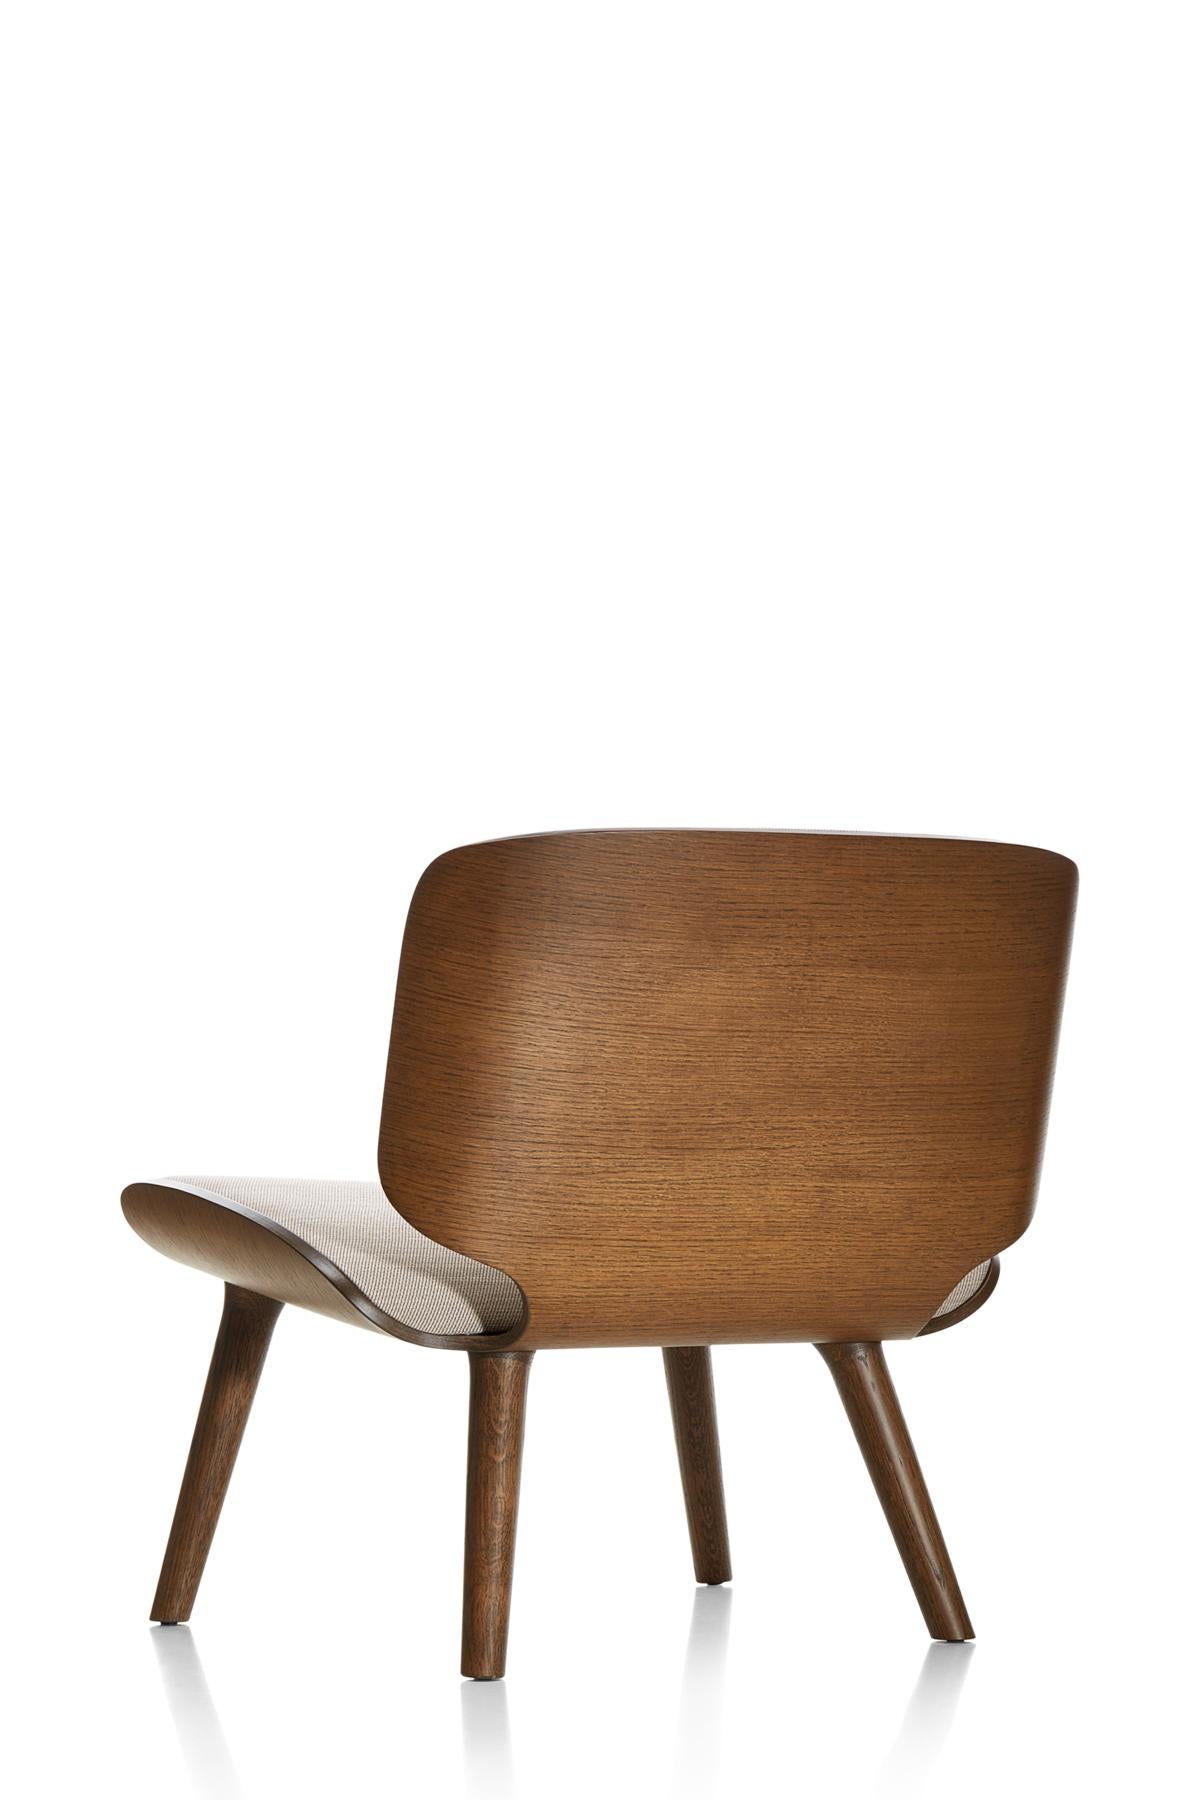 Modern Moooi Nut Lounge Chair in Hallingdal 65 Upholstery & Oak Stained Cinnamon Frame For Sale